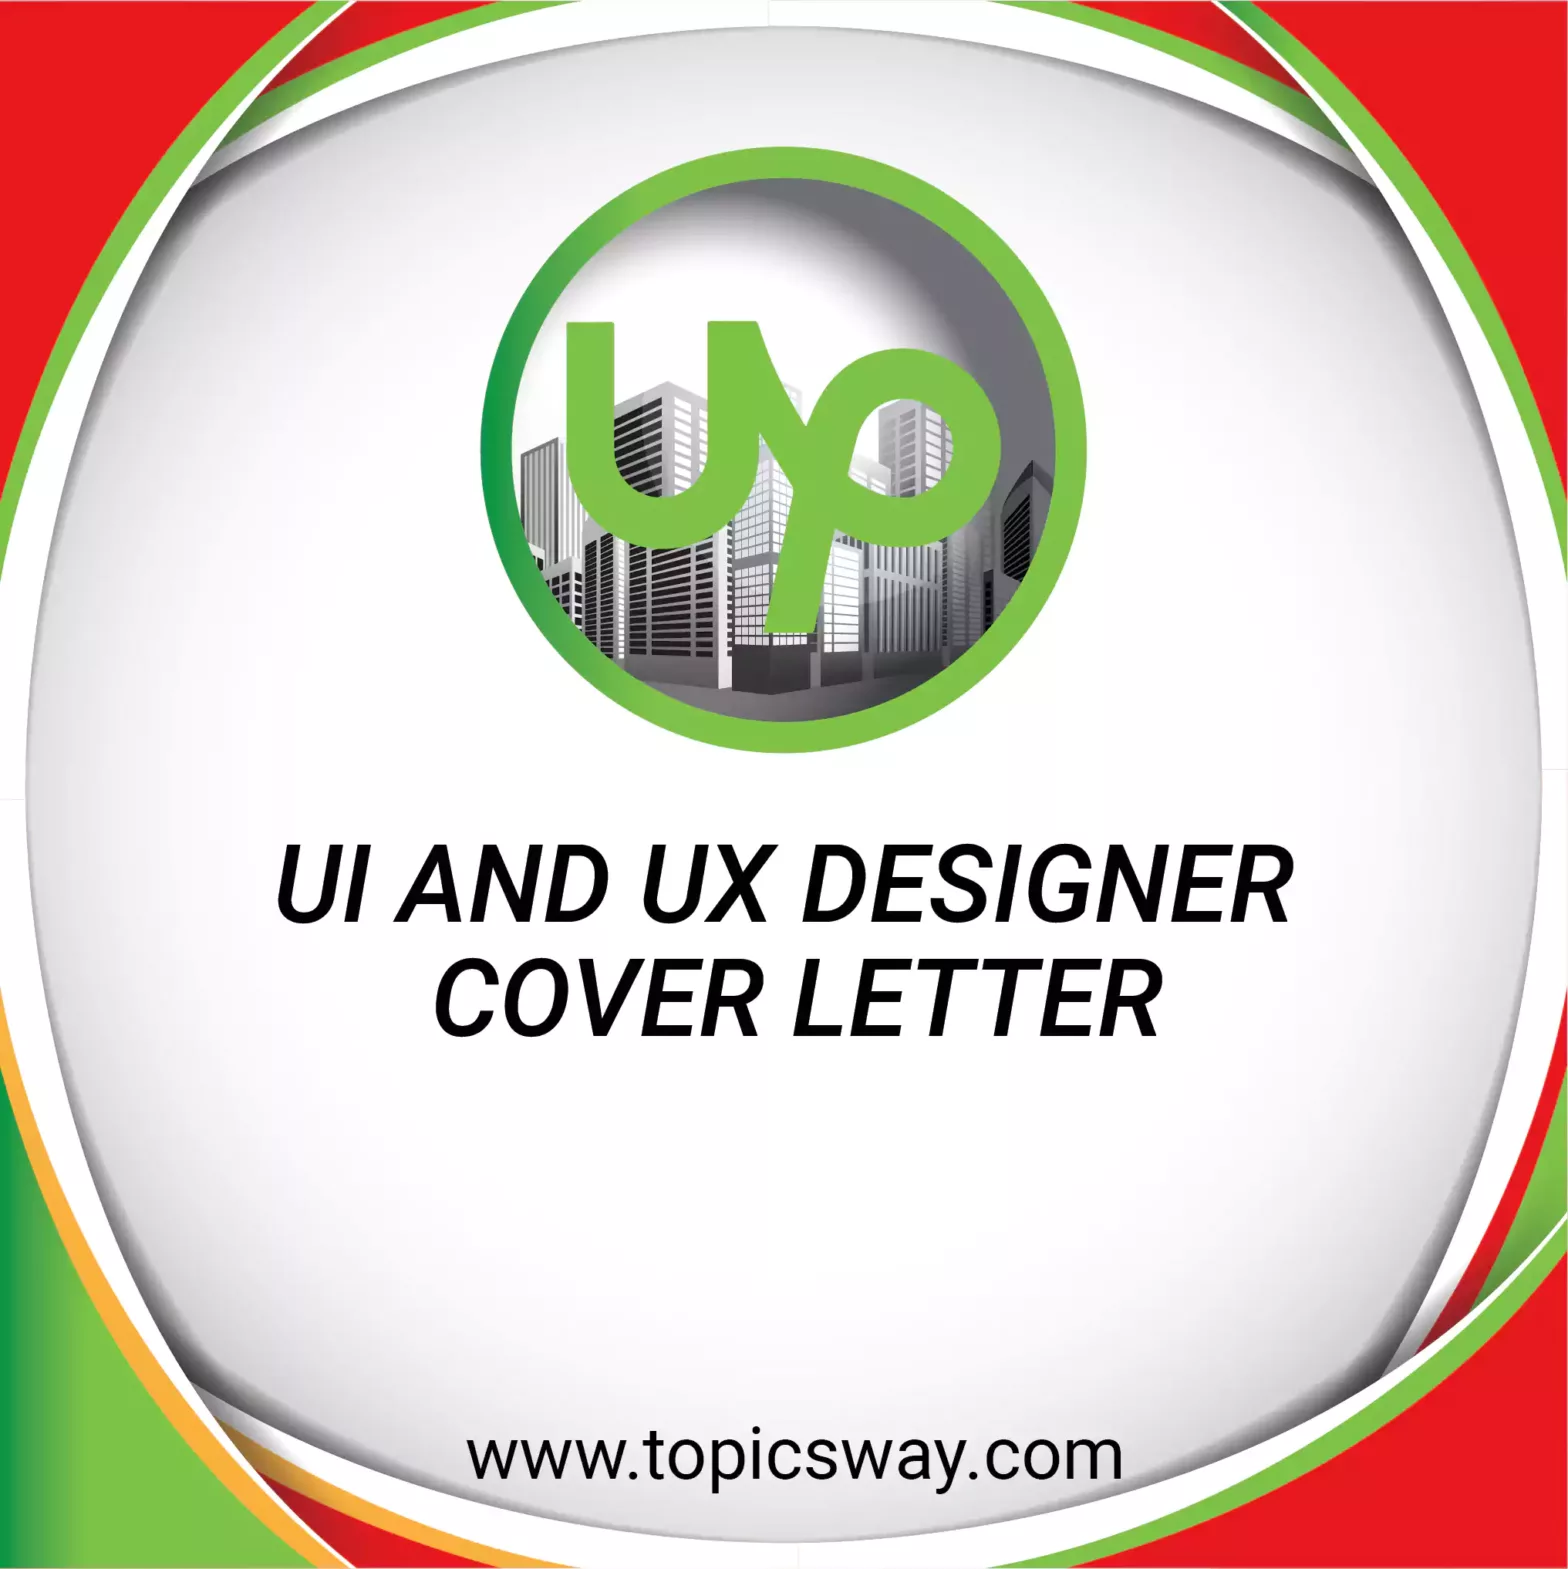 UI AND UX DESIGNER - COVER LETTER